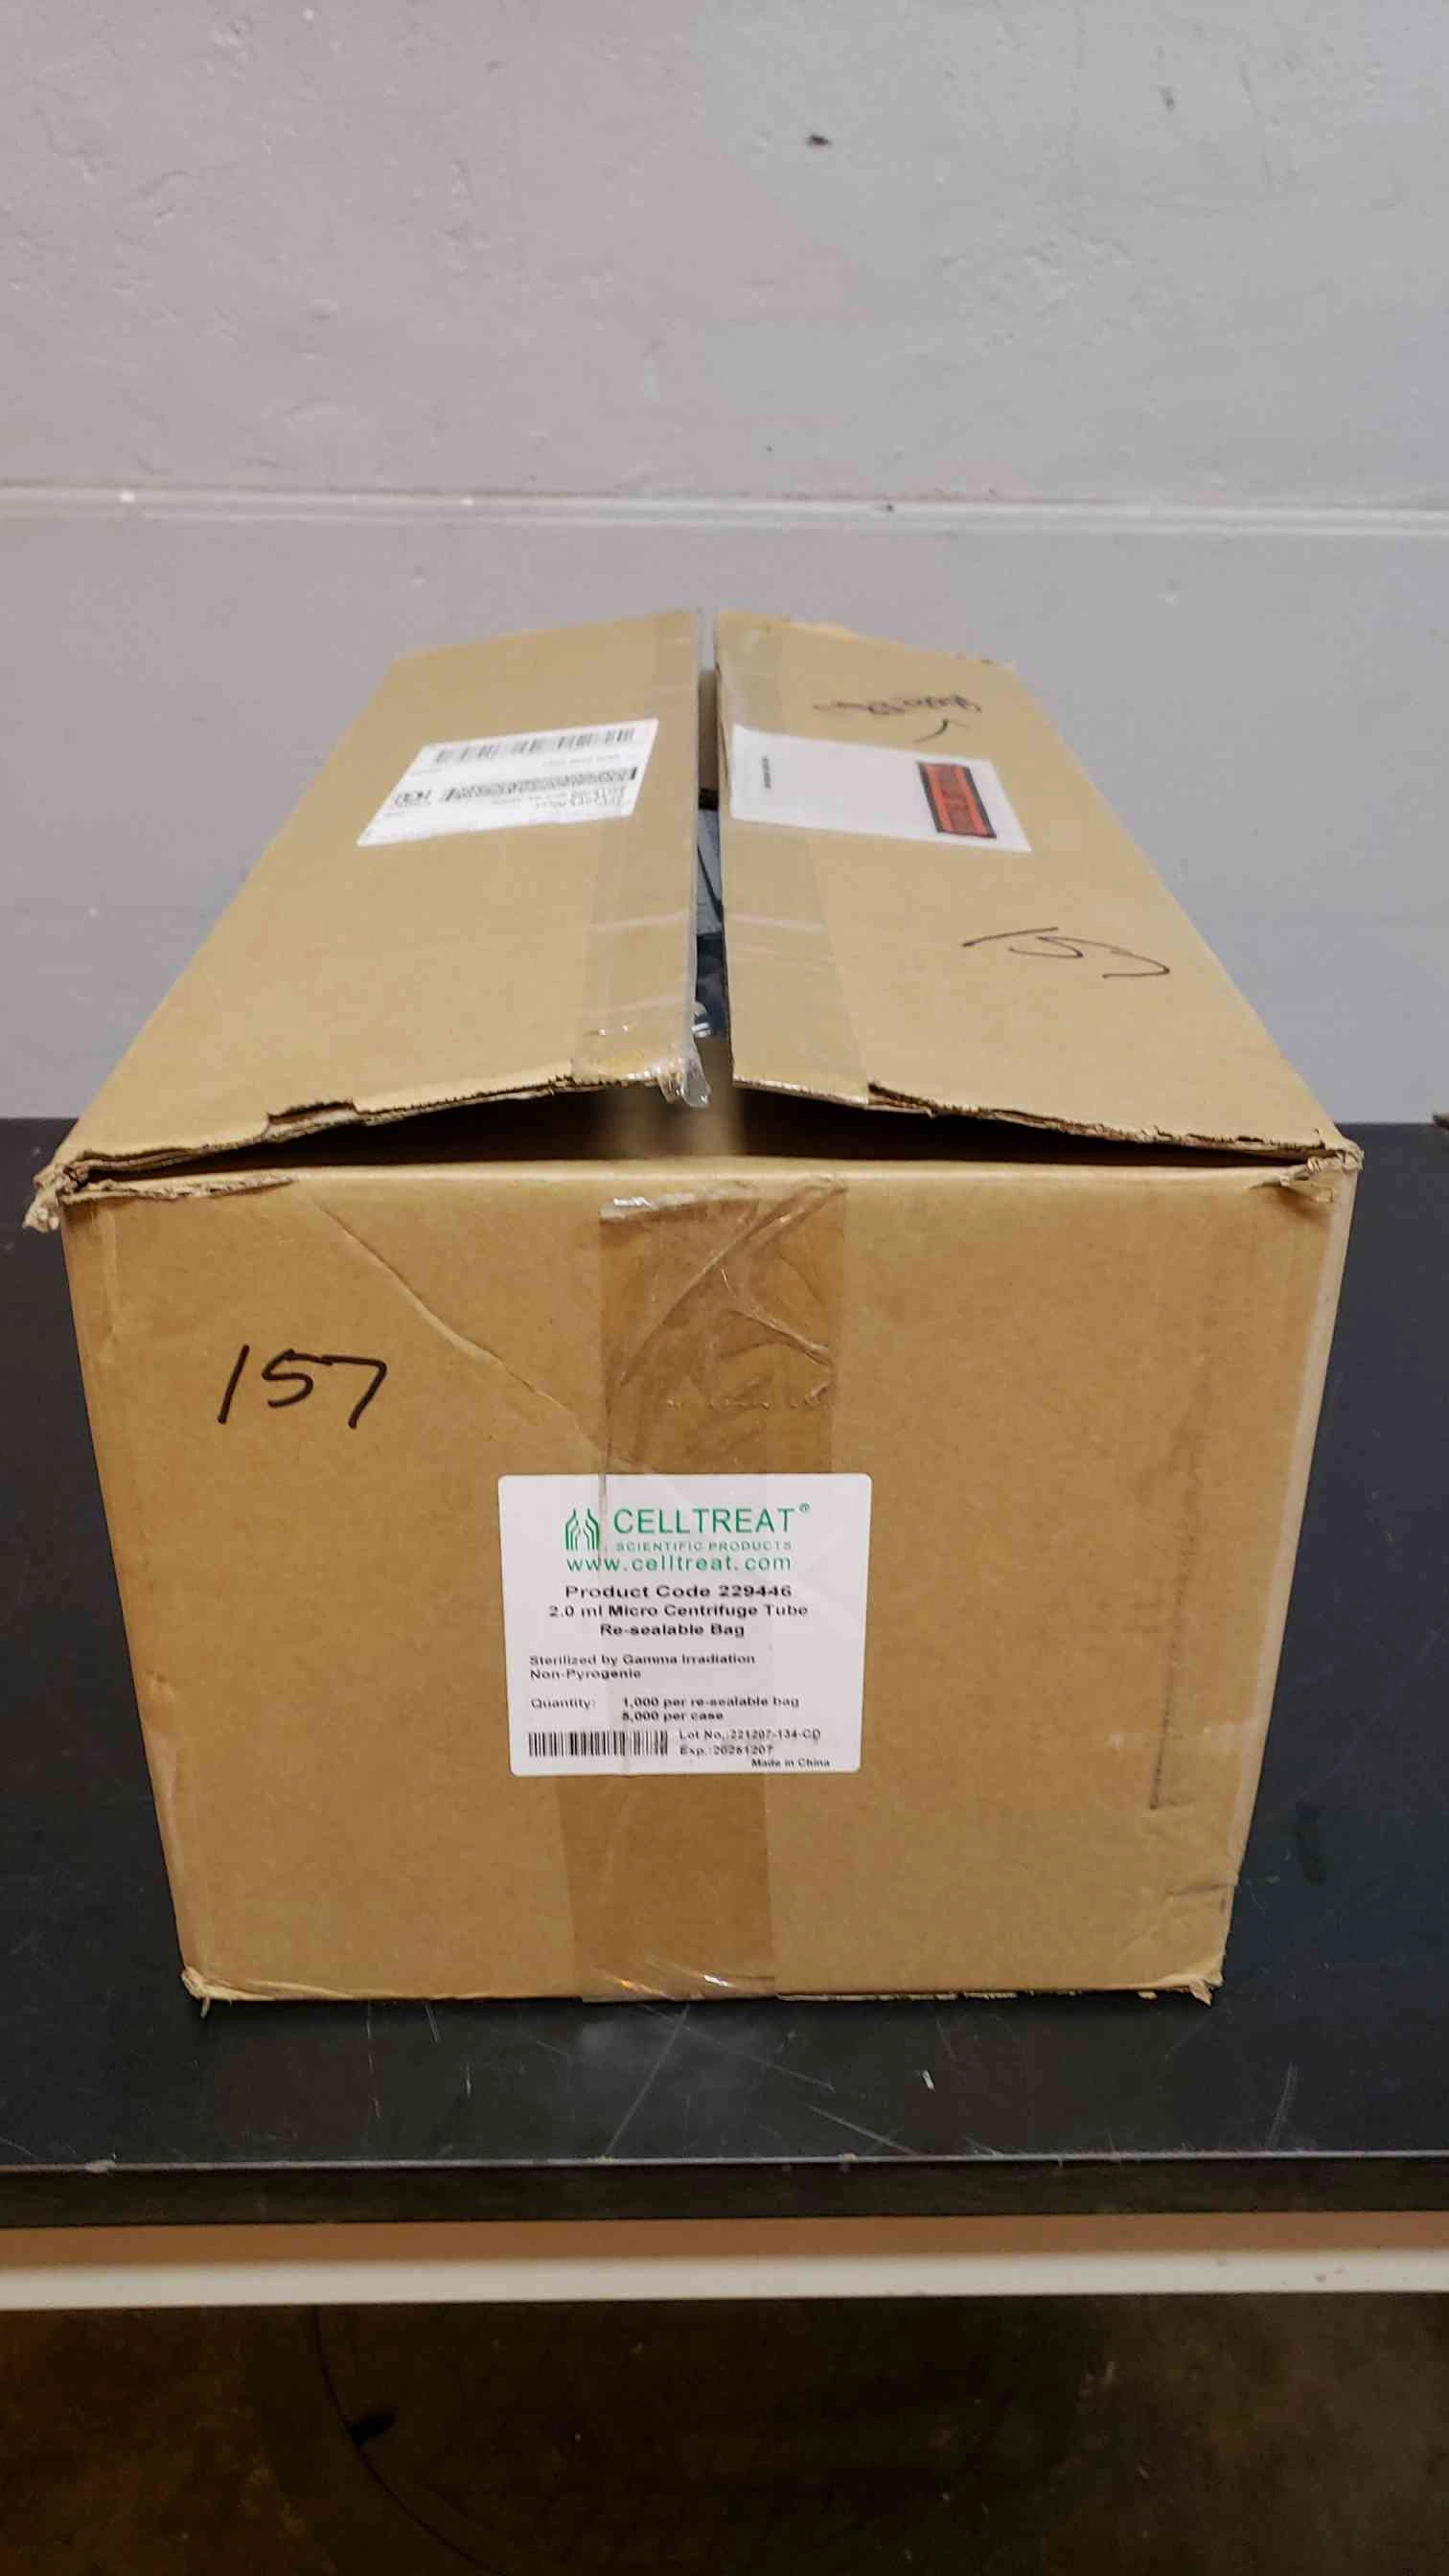 Used Celltreat 2.0mL Micro Centrifuge Tube Product Code 229446 1000/bag, 5000/case